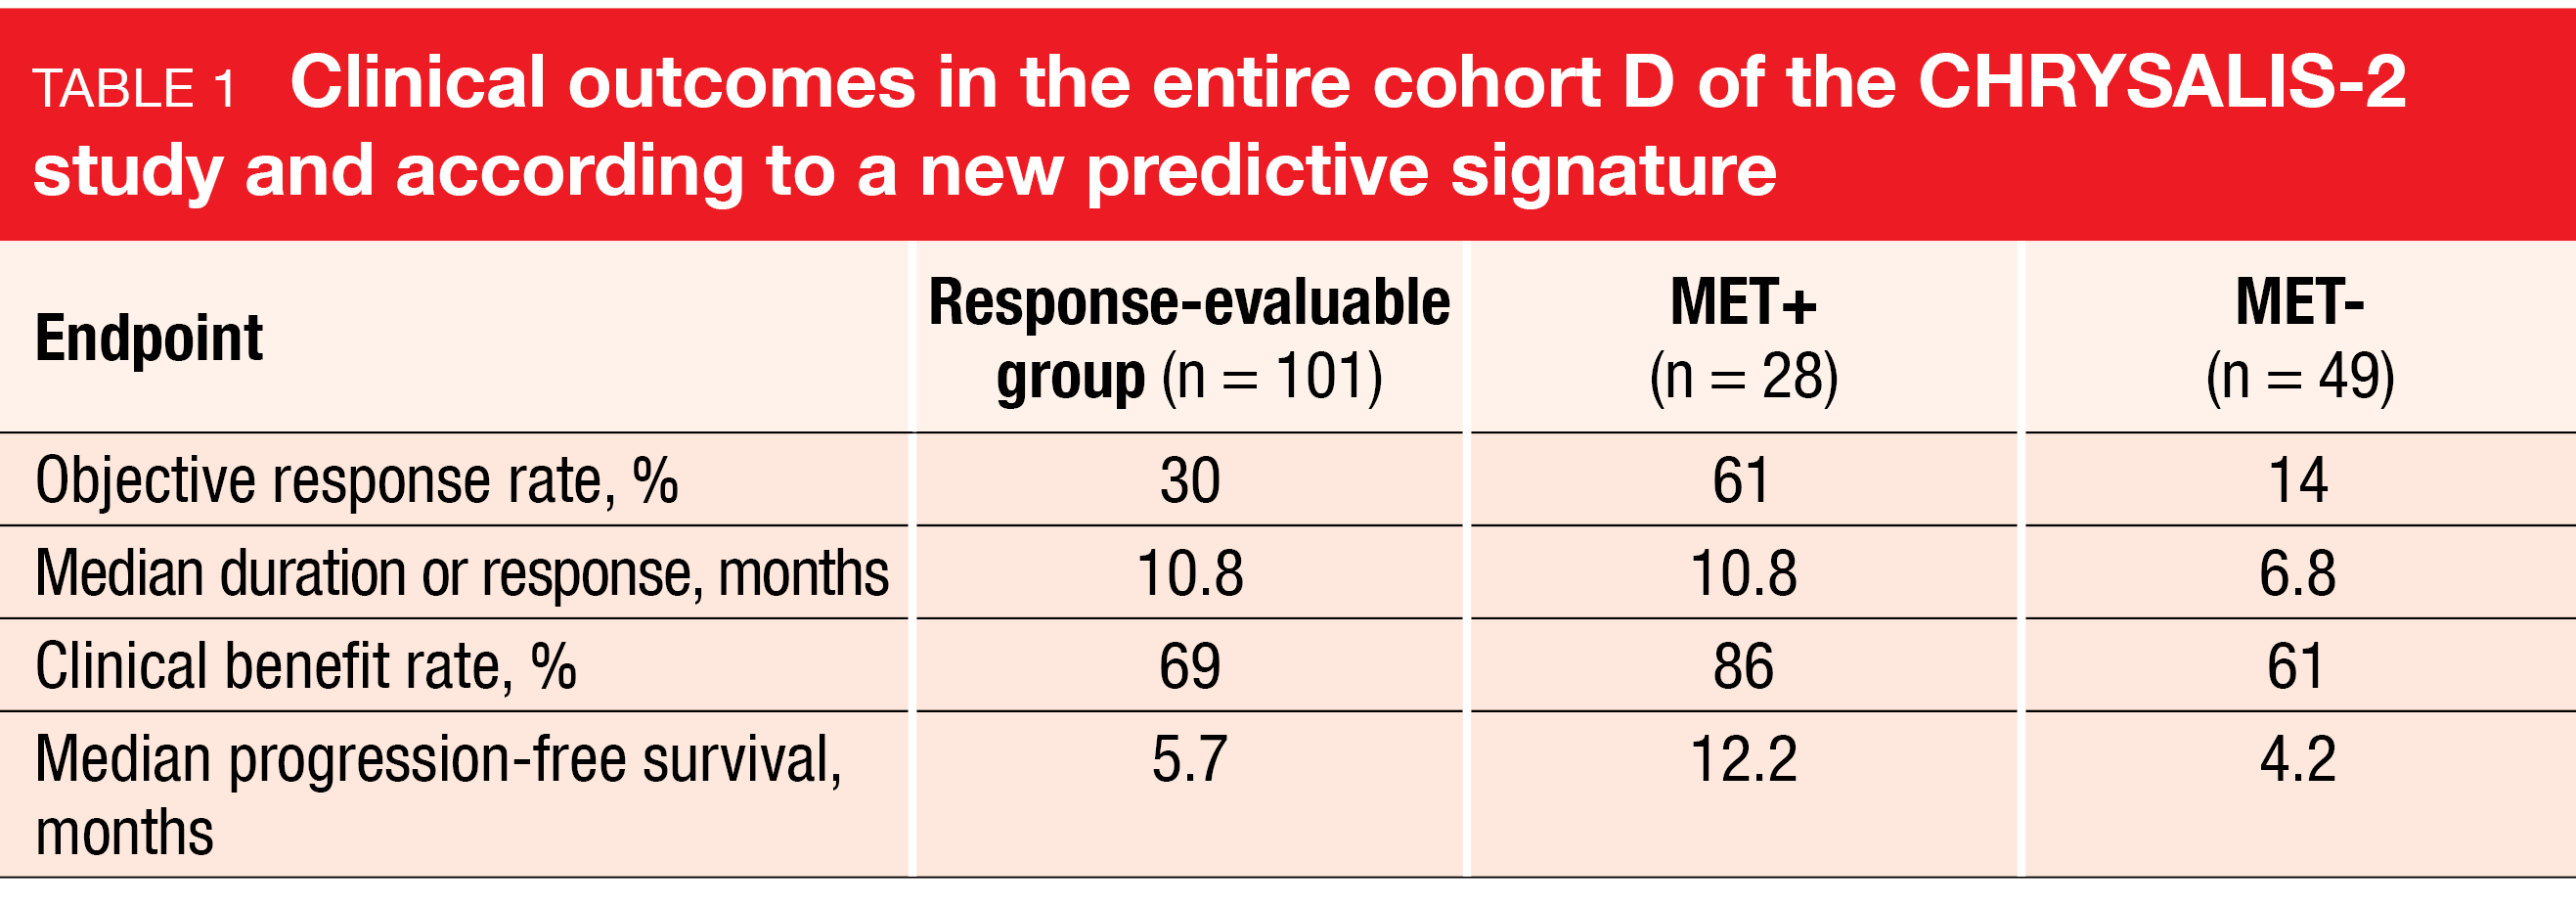 Table 1 Clinical outcomes in the entire cohort D of the CHRYSALIS-2 study and according to a new predictive signature